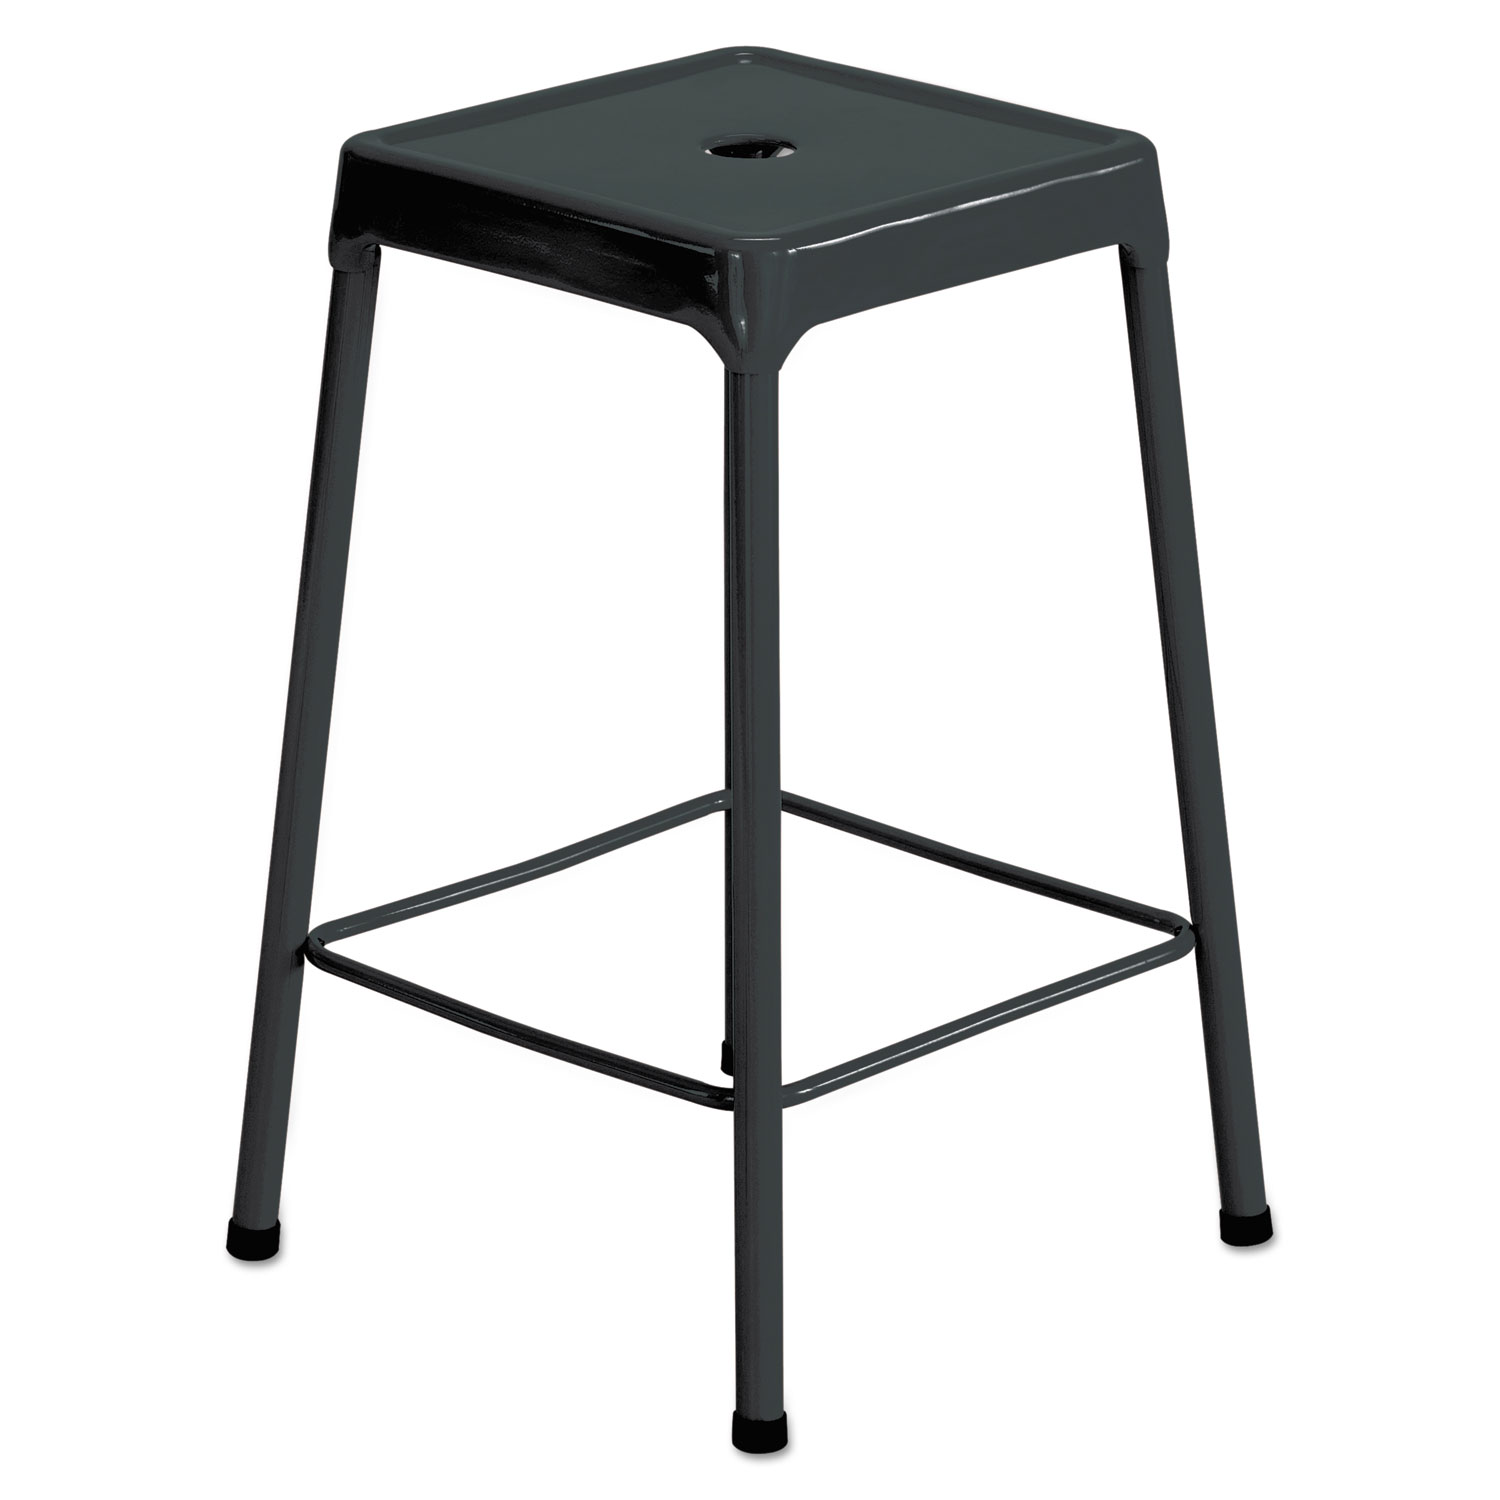  Safco 6605BL Counter-Height Steel Stool, 25 Seat Height, Supports up to 250 lbs., Black Seat/Black Back, Black Base (SAF6605BL) 